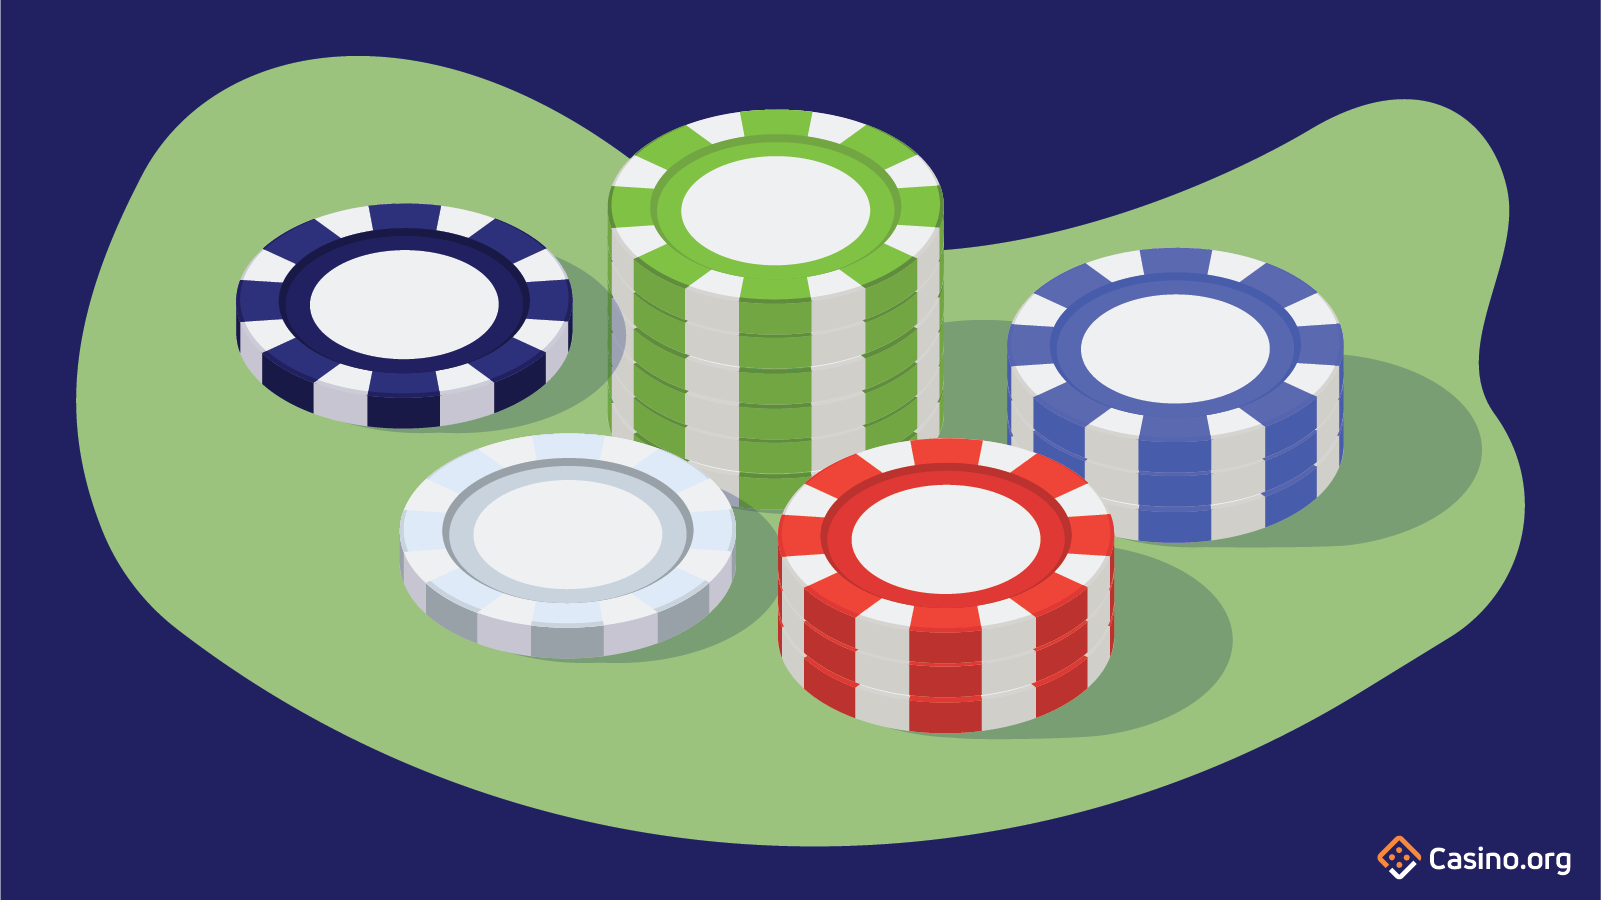 Image of poker chips stacked.